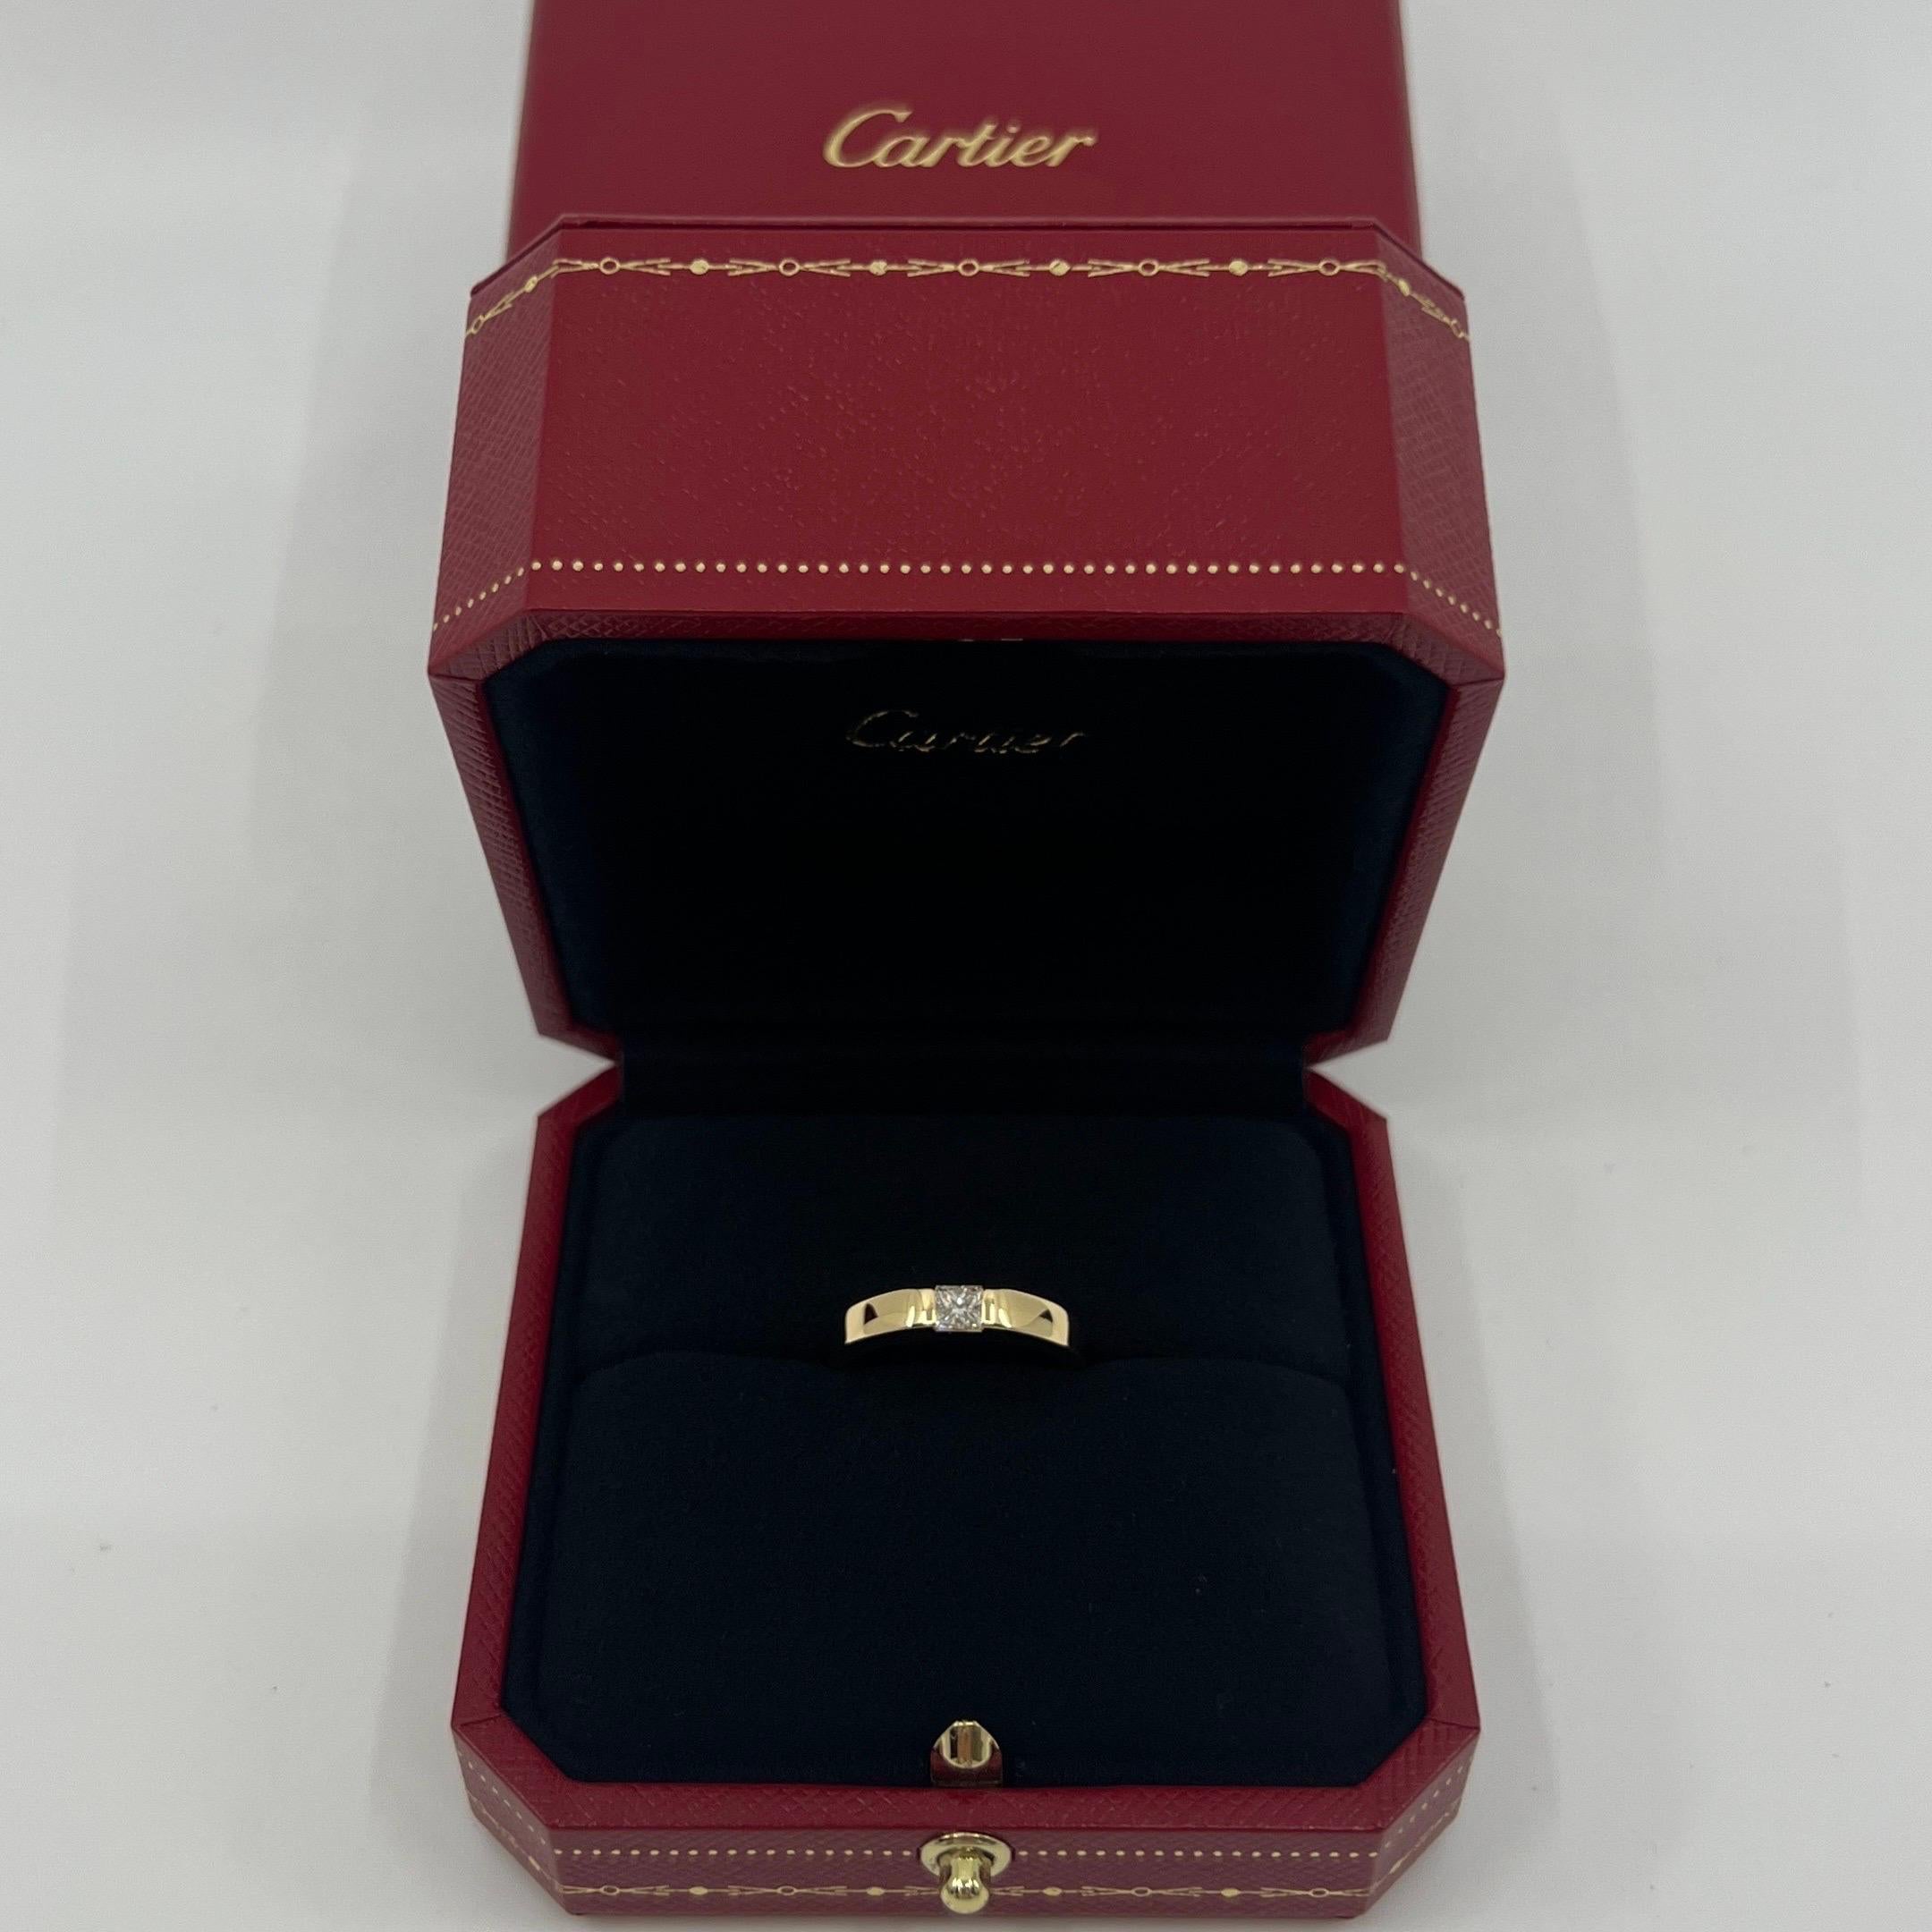 Vintage Cartier Natural Square Princess Cut Diamond 18k Yellow Gold Solitaire Band Ring.

Stunning yellow gold ring set with a fine 0.25ct natural square princess cut diamond. Approx. E/F colour VVS clarity with an excellent cut.
Fine jewellery